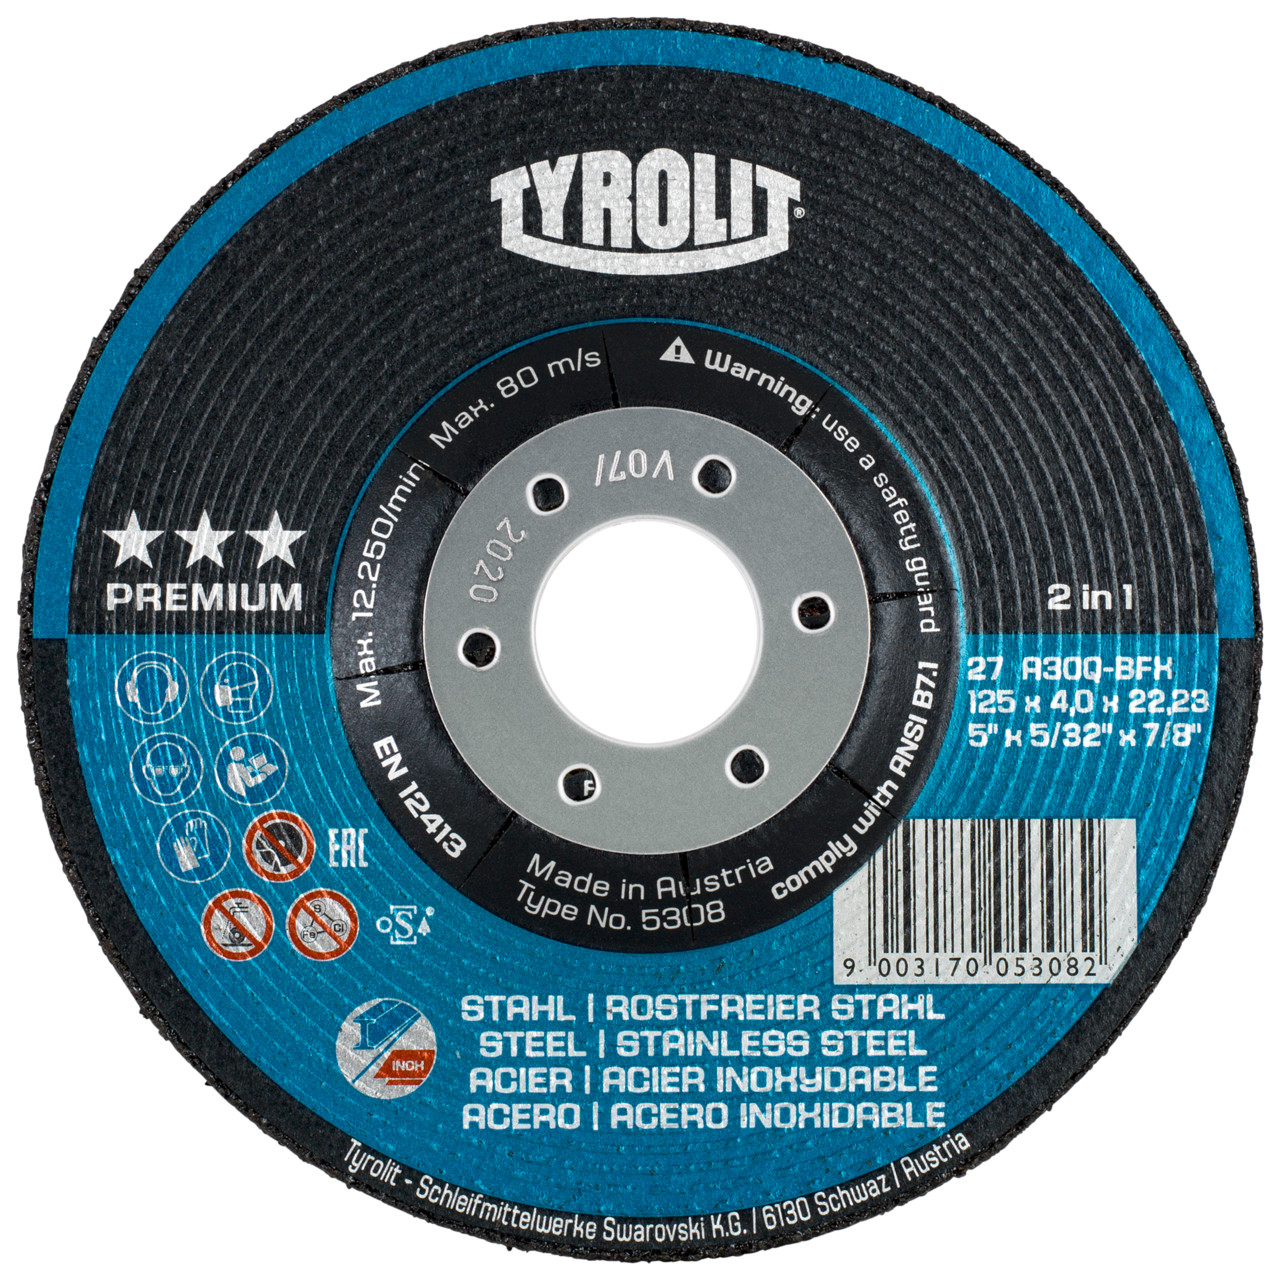 TYROLIT grinding wheel DxUxH 75x6x9.5 2in1 for steel and stainless steel, shape: 27 - offset version, Art. 5270